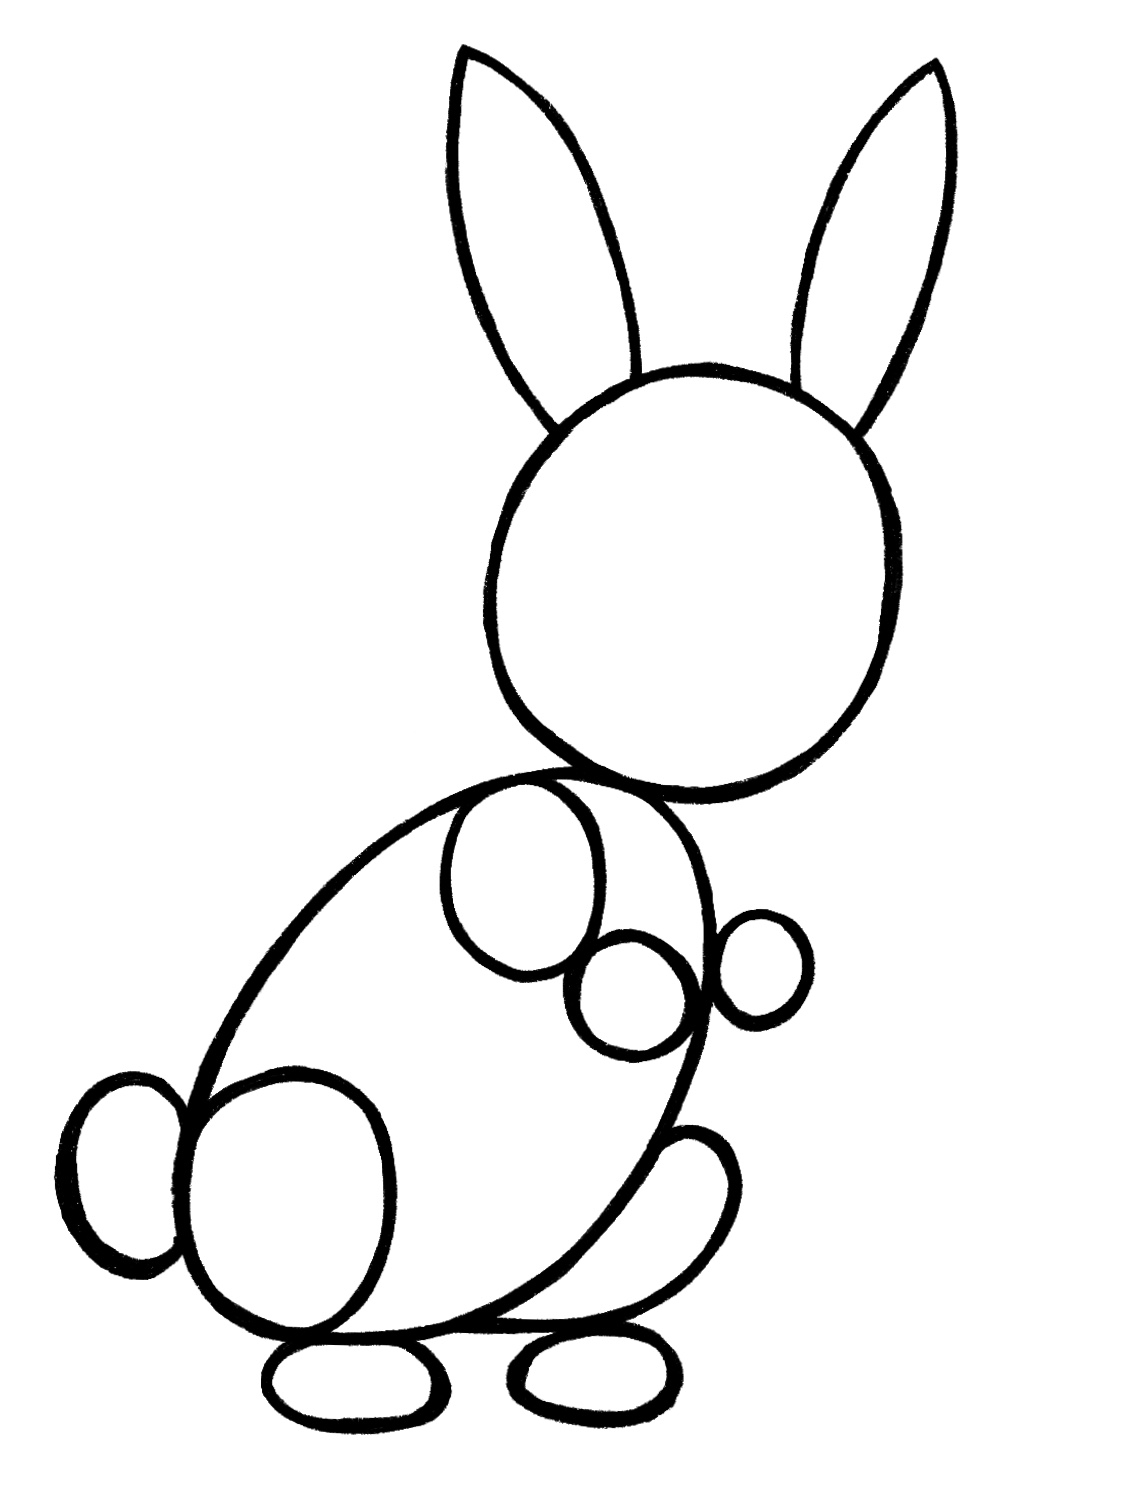 How to Draw a Bunny in a Few Easy Steps | Easy Drawing Guides-saigonsouth.com.vn